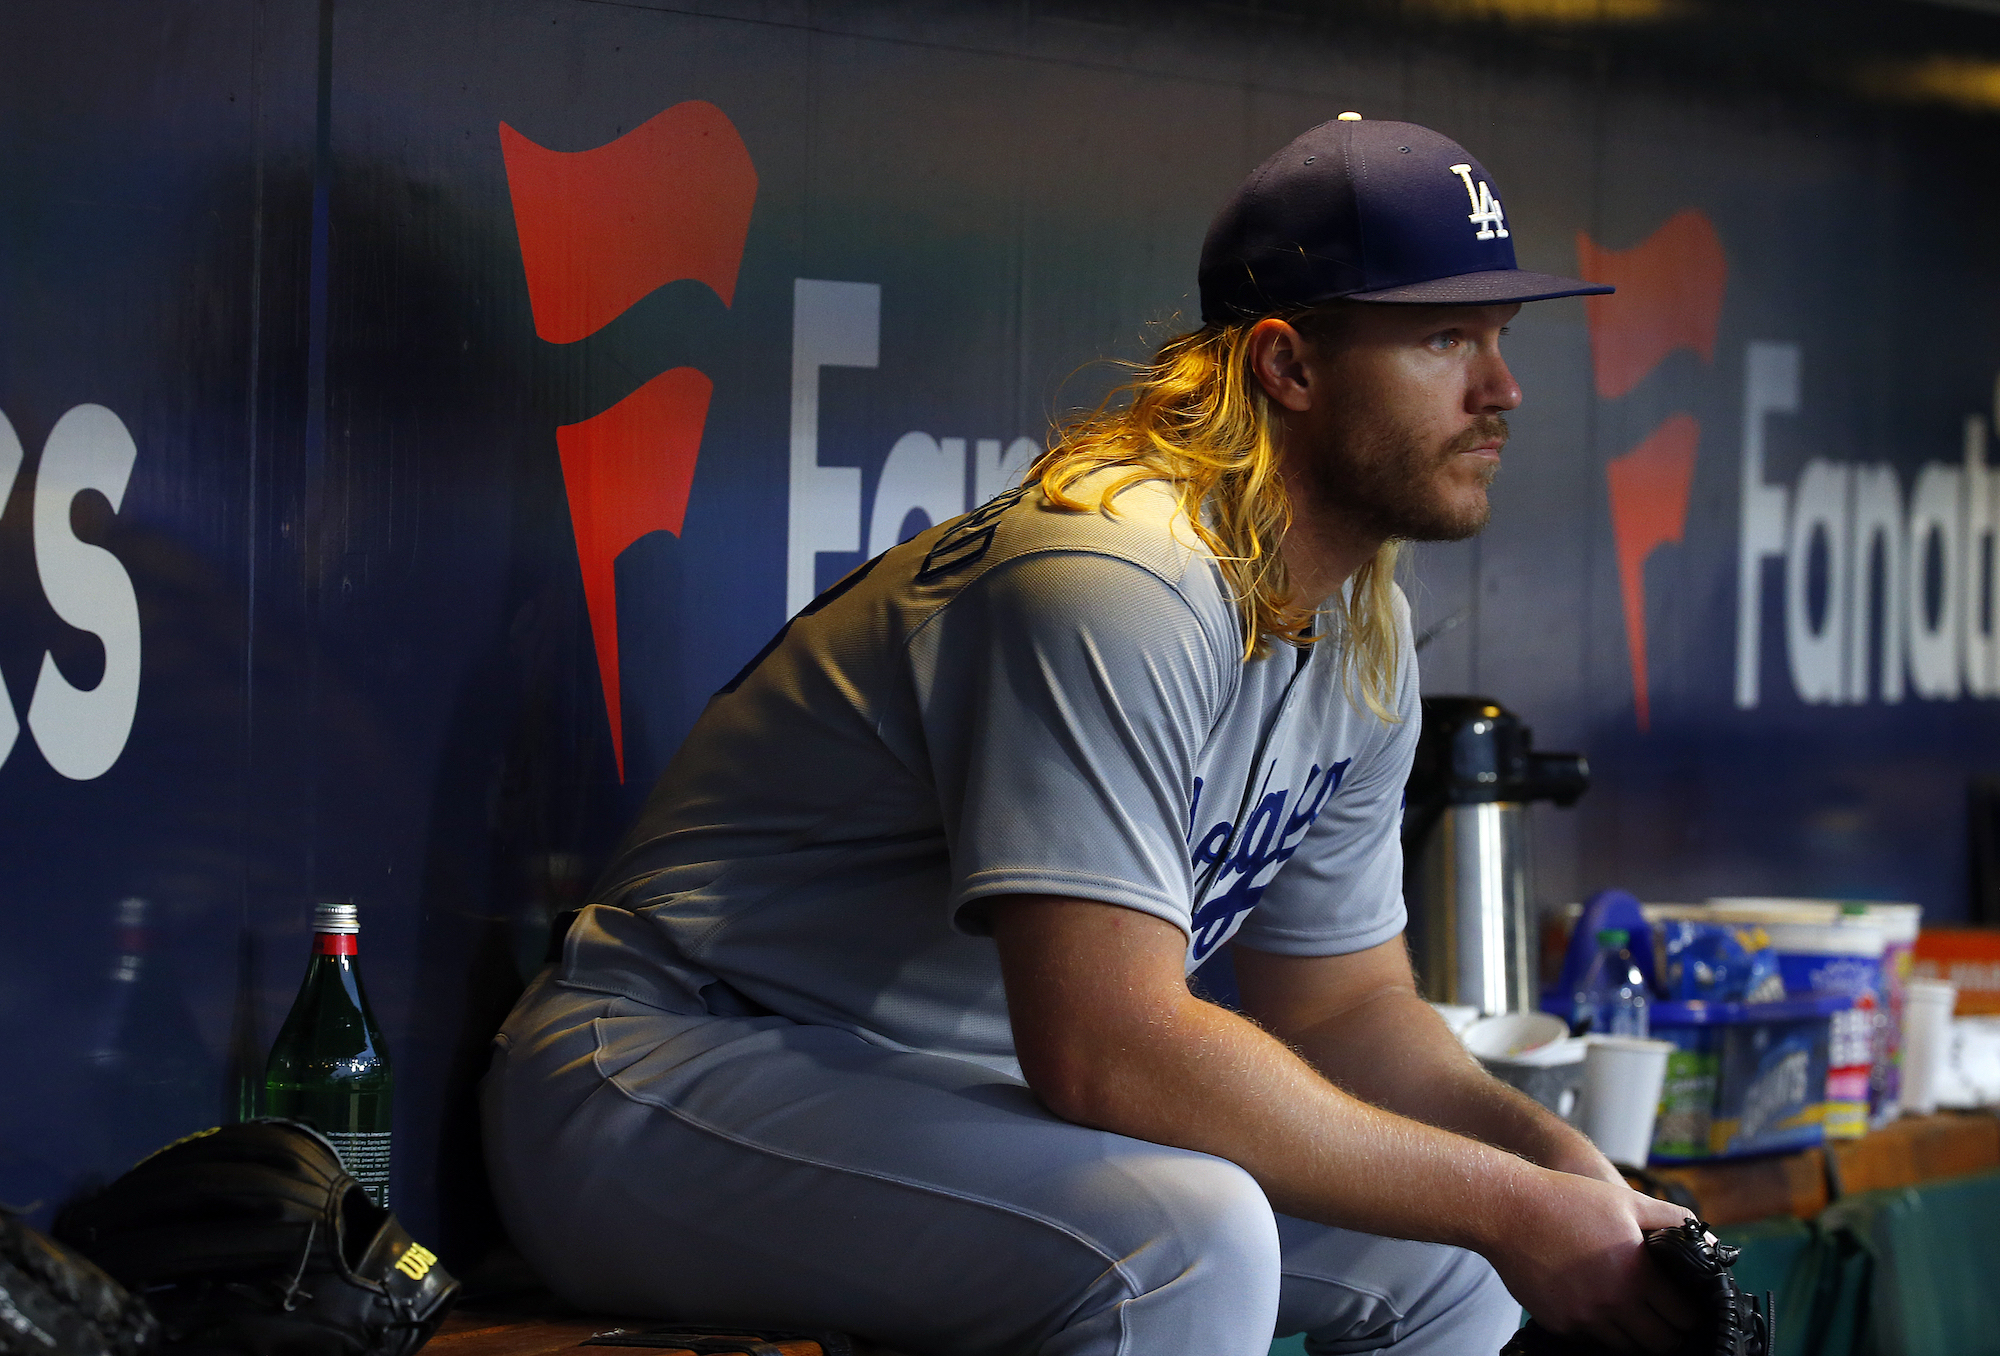 PITTSBURGH, PA - APRIL 25: Noah Syndergaard #43 of the Los Angeles Dodgers looks on from the dugout in the fifth inning against the Pittsburgh Pirates at PNC Park on April 25, 2023 in Pittsburgh, Pennsylvania. (Photo by Justin K. Aller/Getty Images)